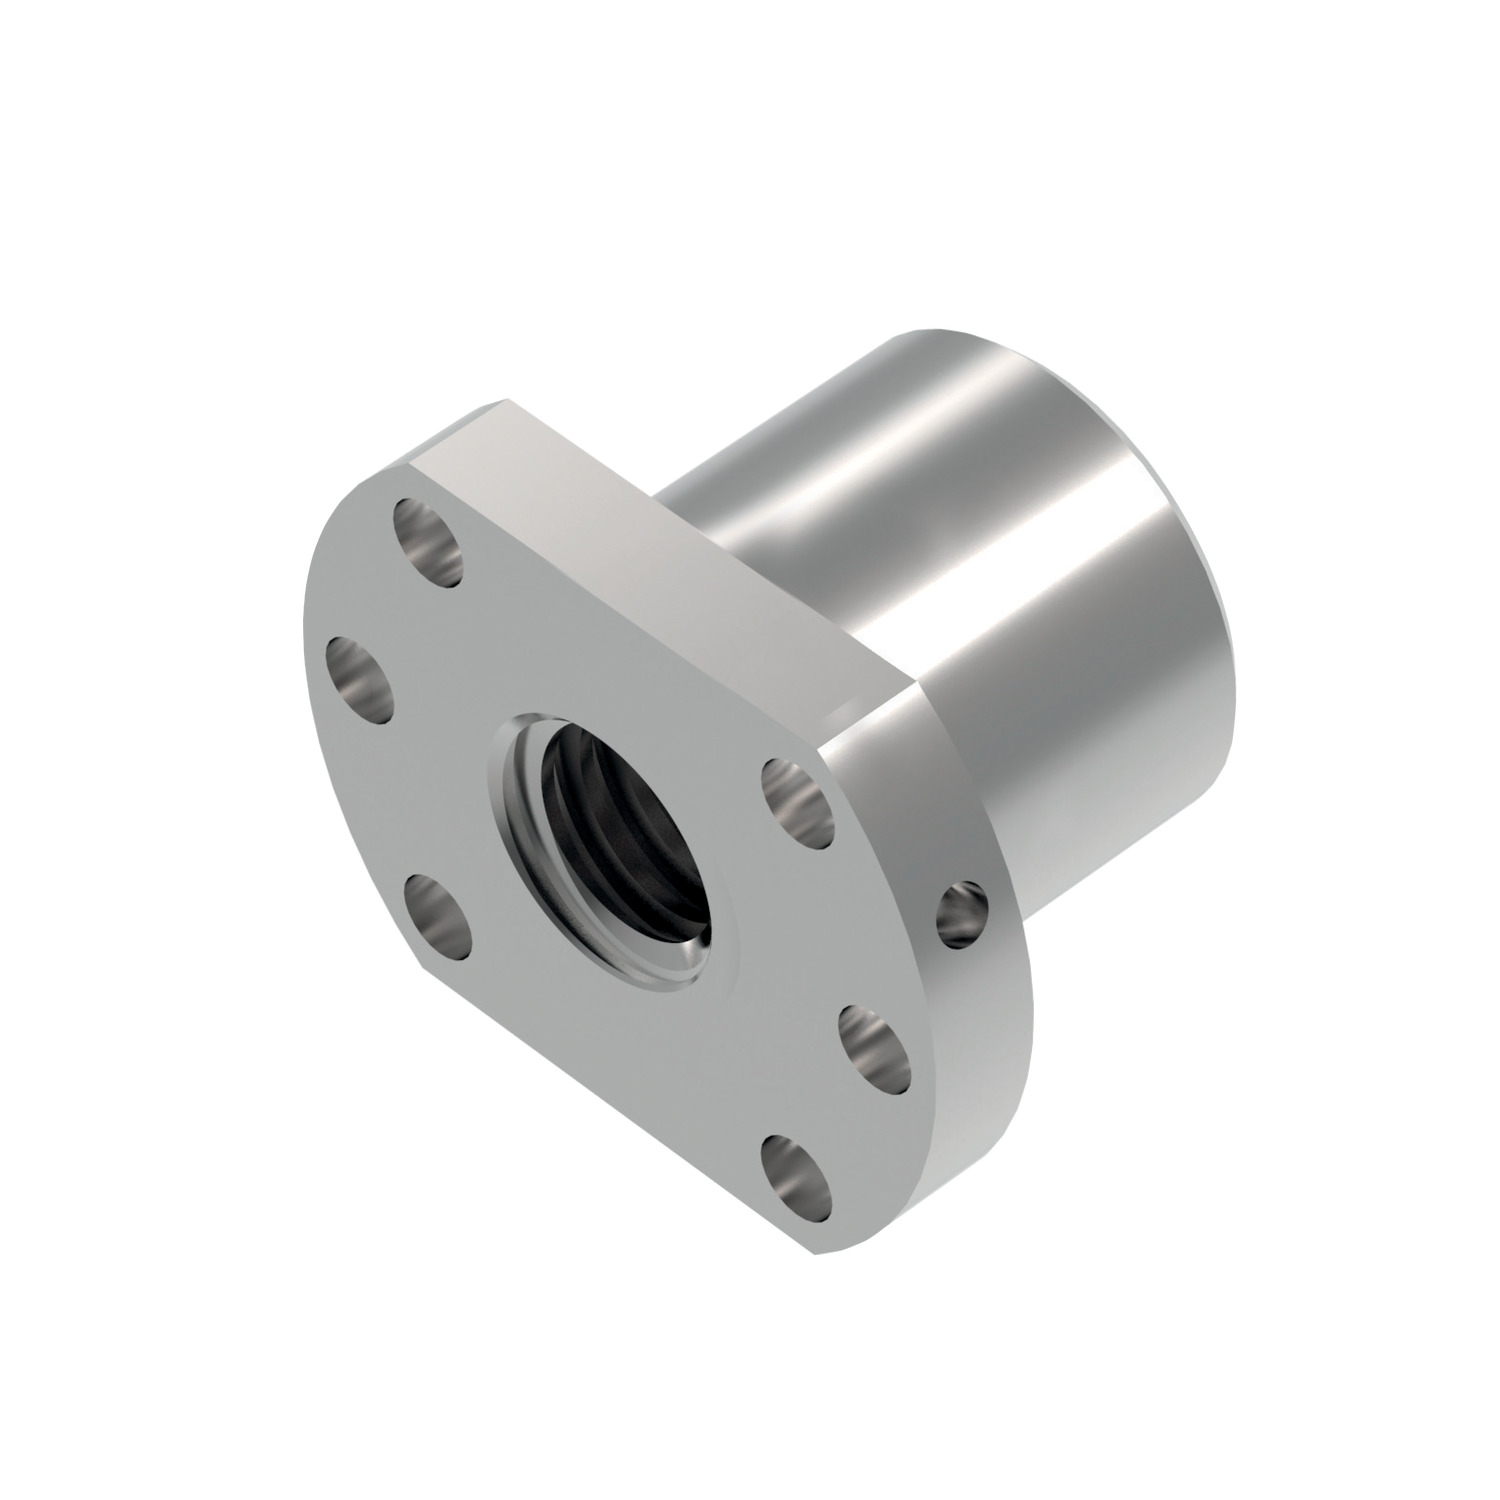 Product L1370, Flanged Ball Nuts DIN 69051, form B / 